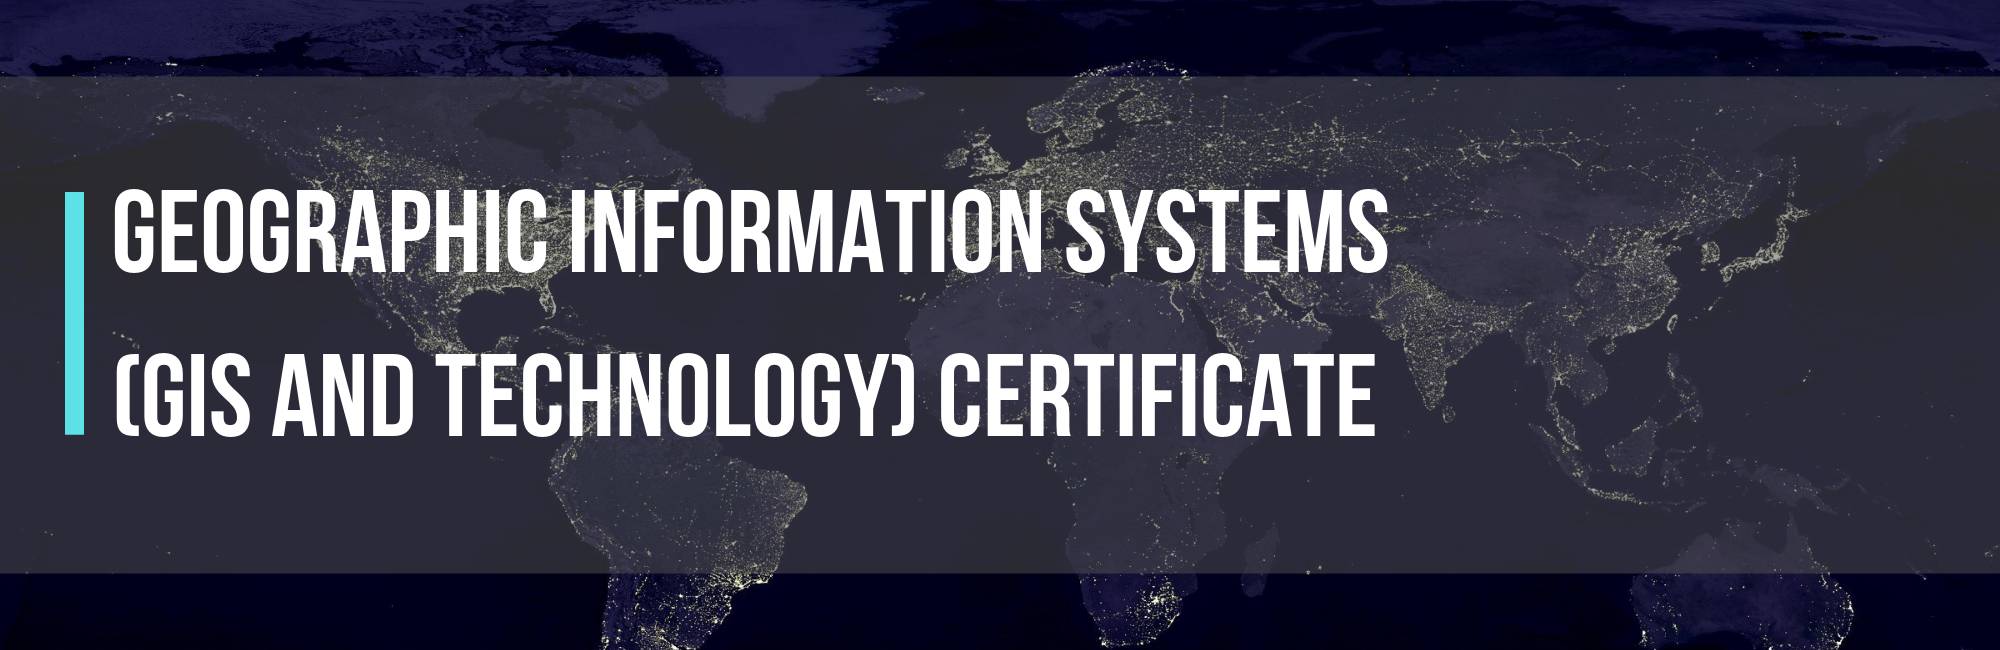 Geographic Information Systems (GIS and Technology) Certificate